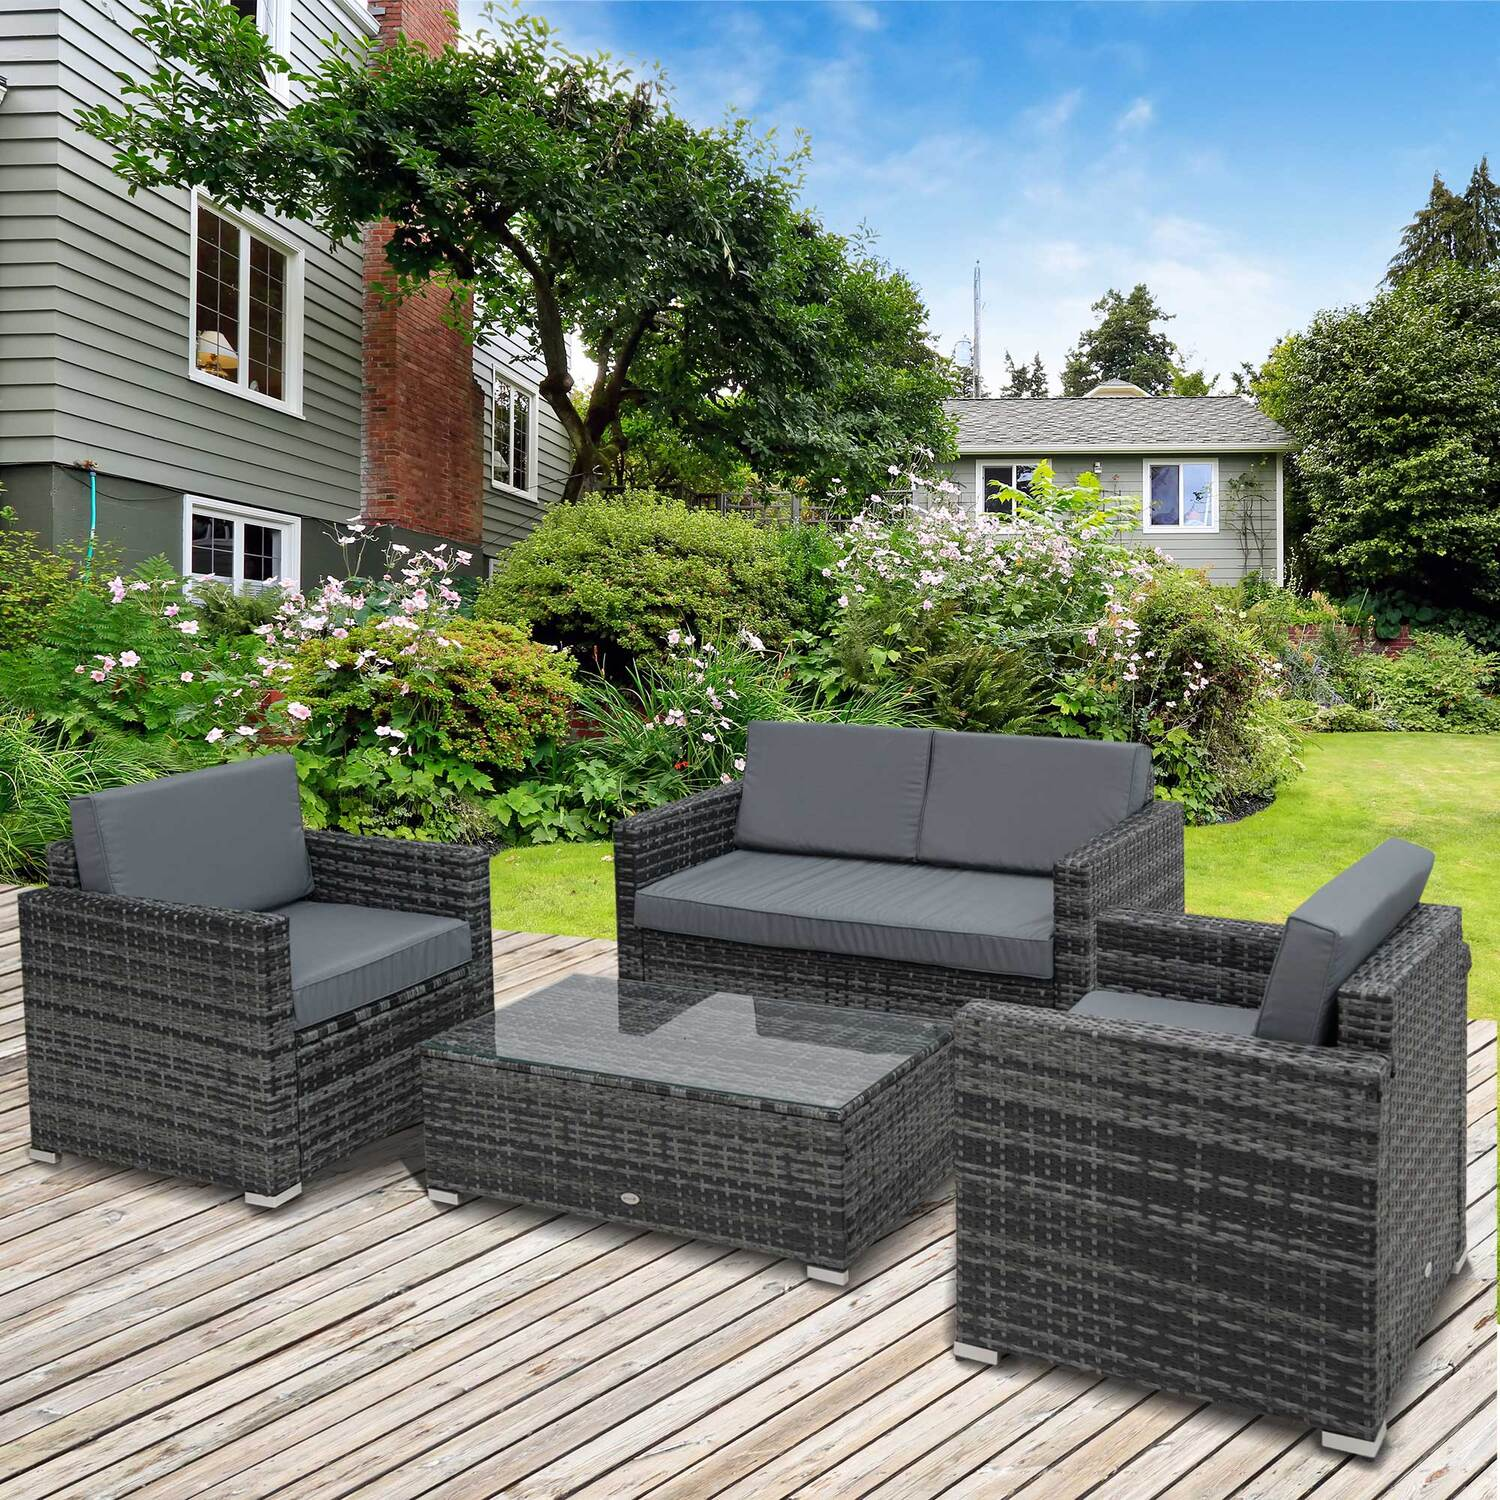 AICATHLON Outdoor Guide -What are the advantages of outdoor rattan furniture?